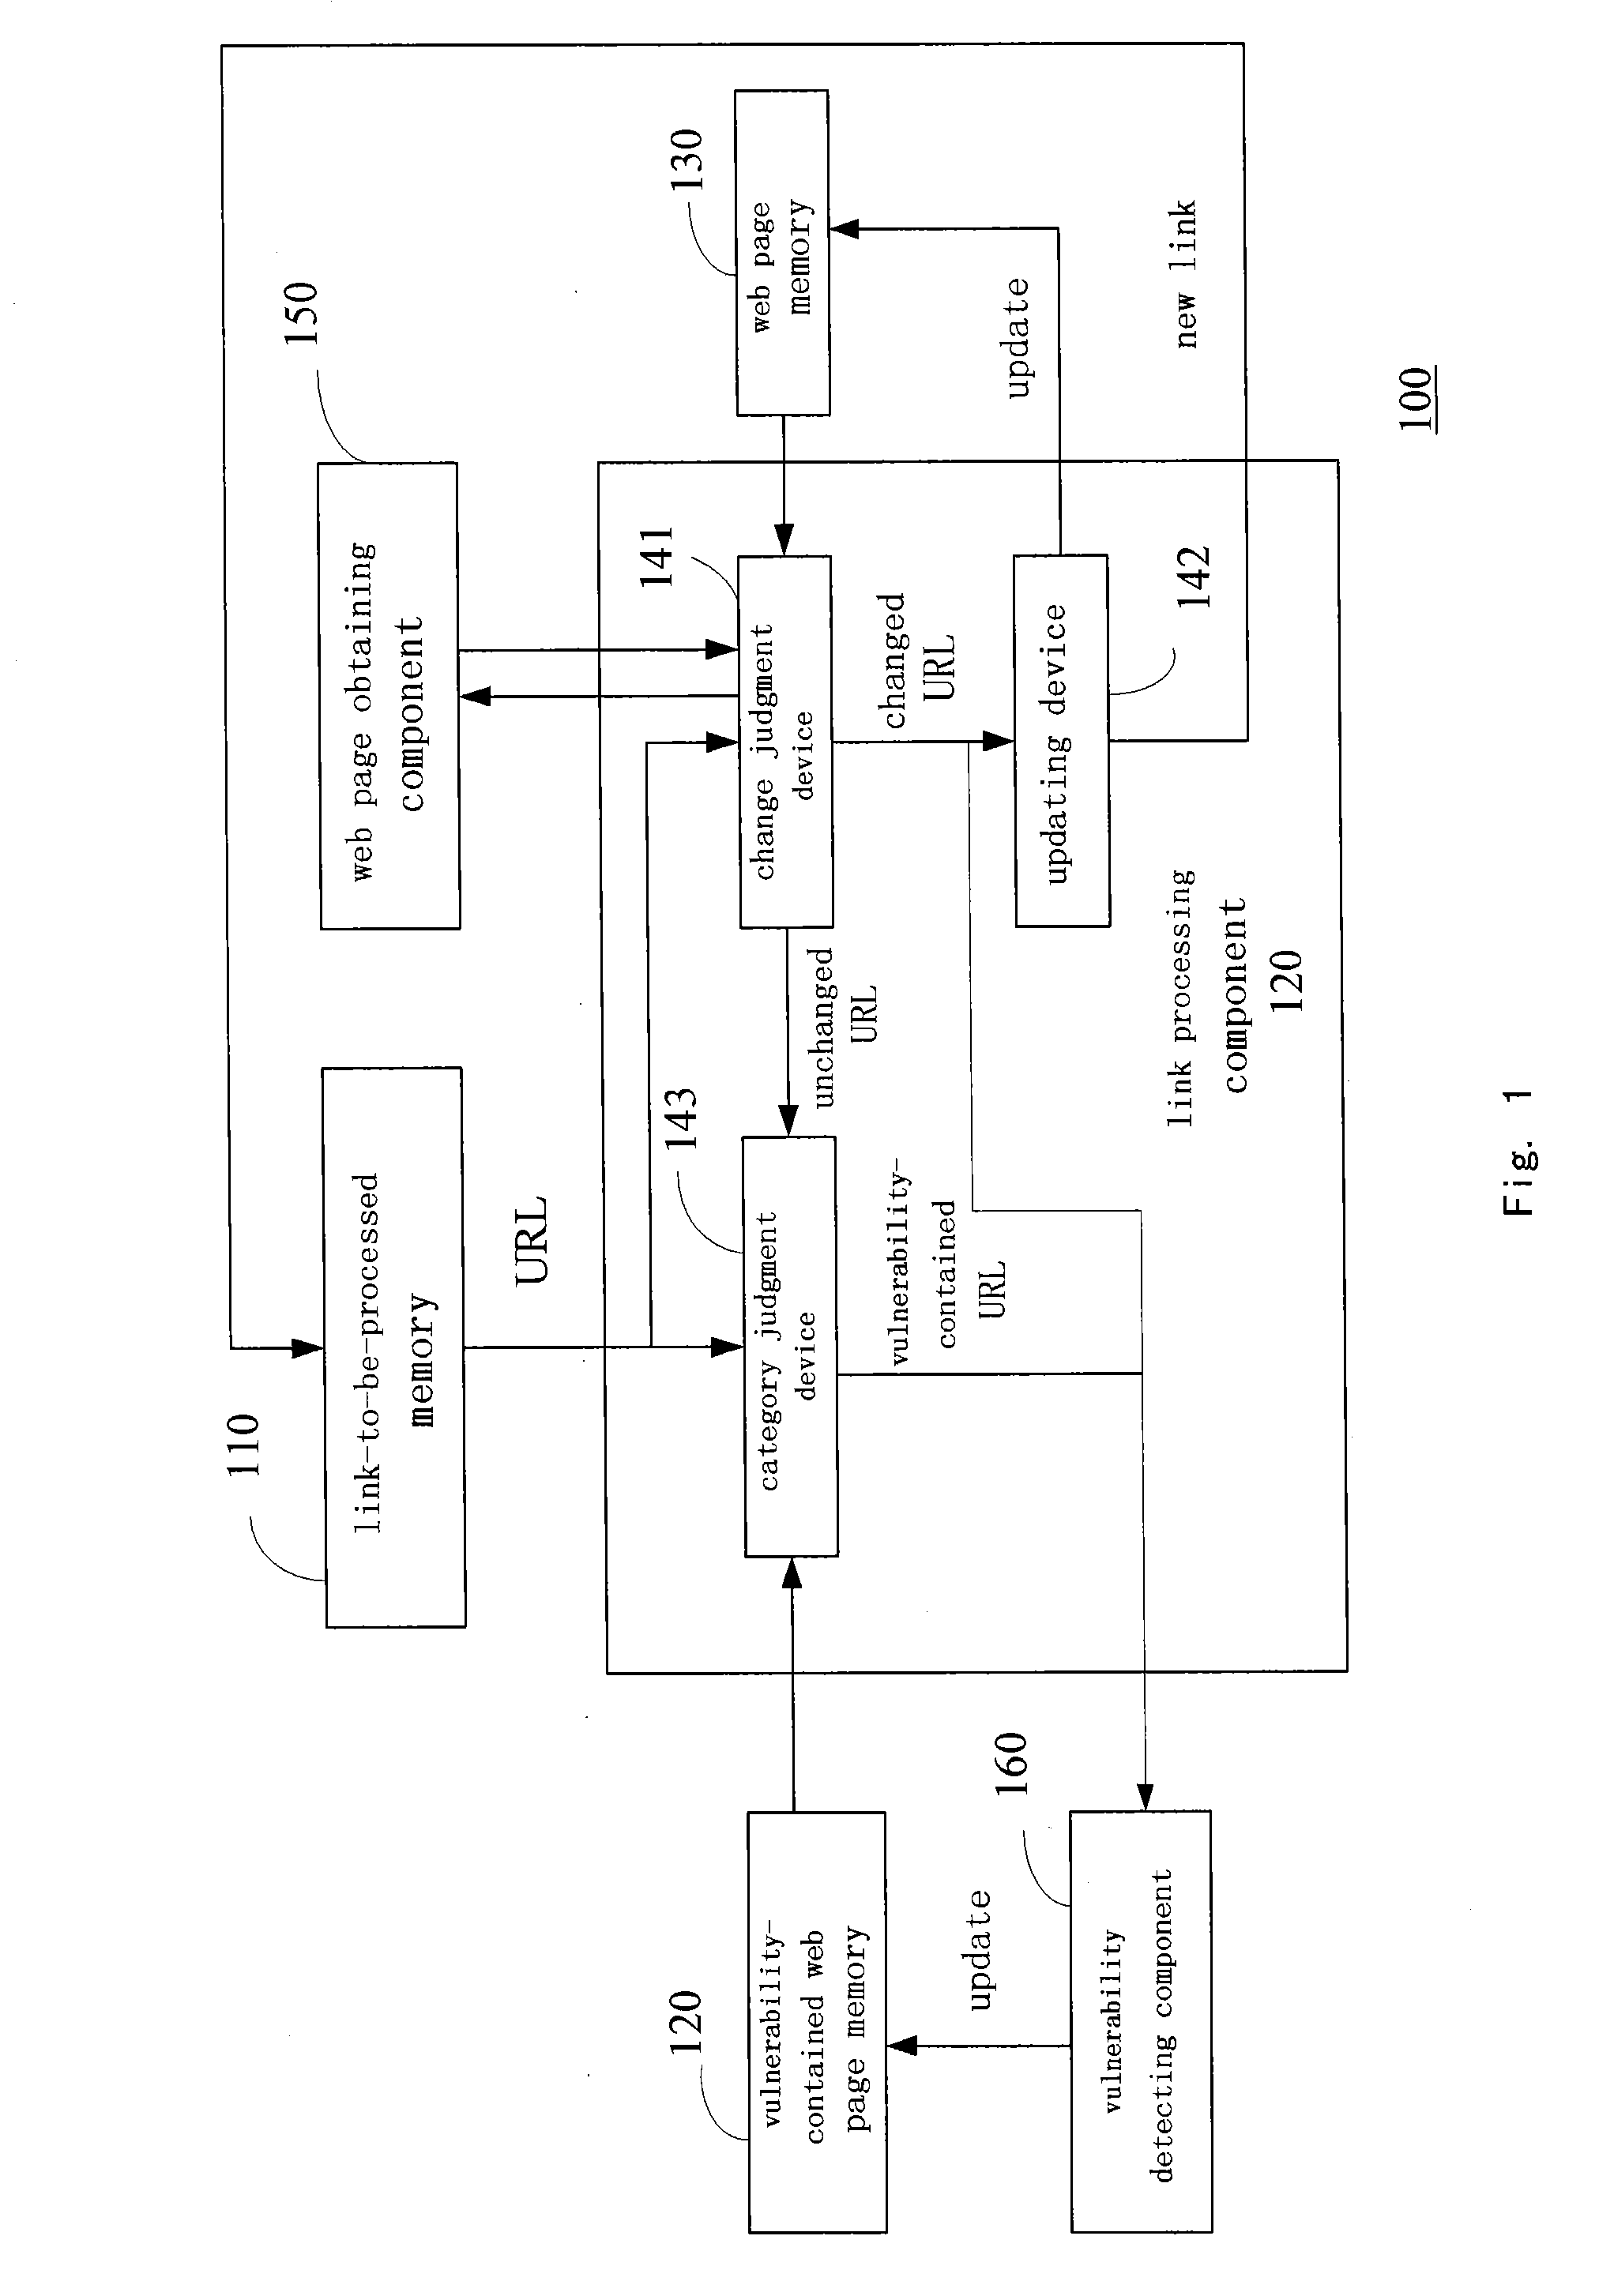 Website scanning device and method